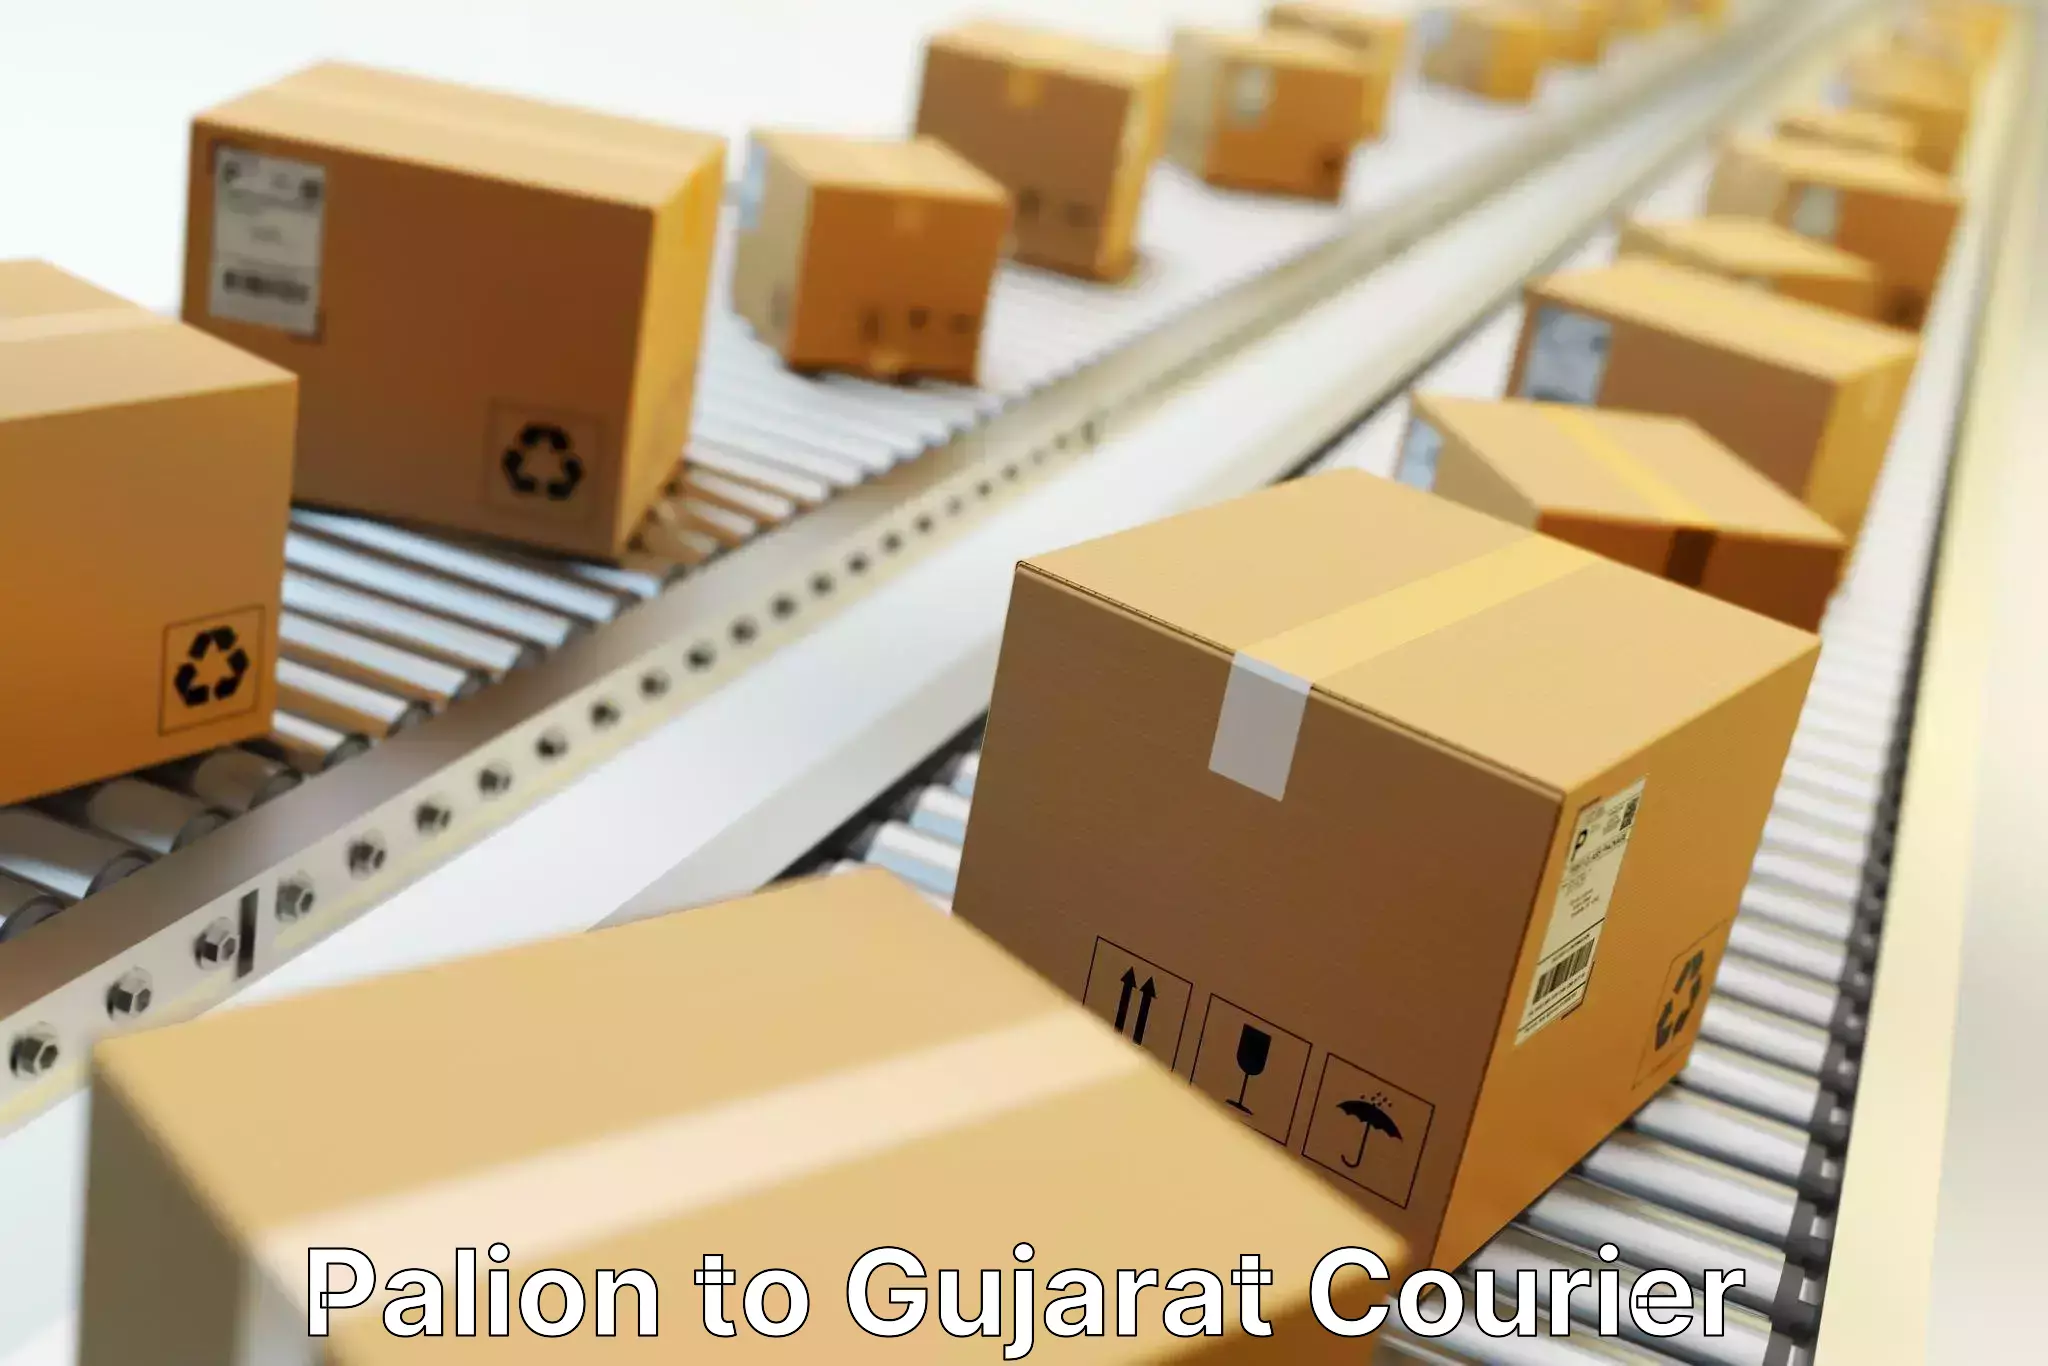 Seamless shipping service Palion to Songadh